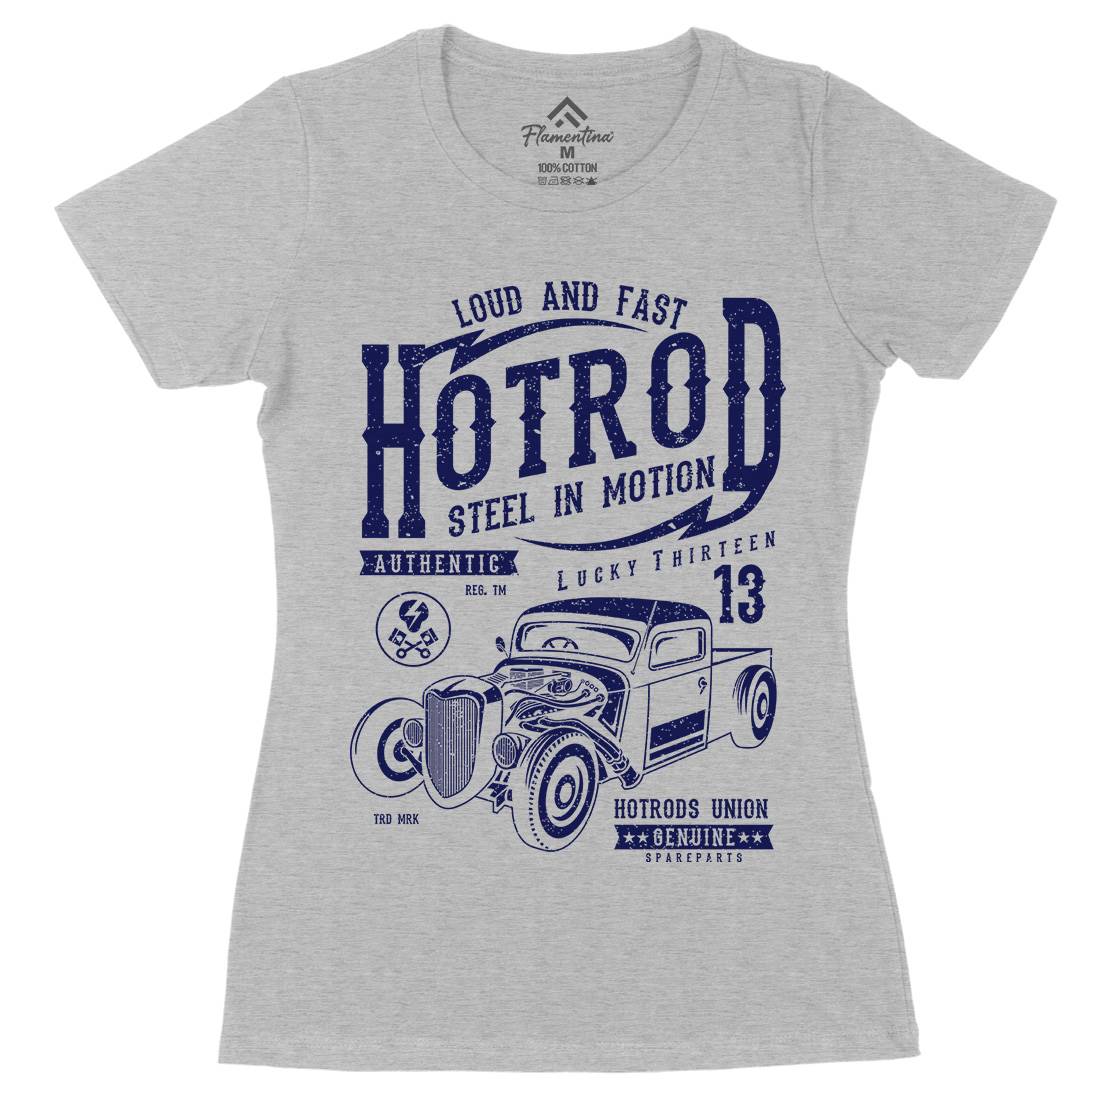 Steel In Motion Womens Organic Crew Neck T-Shirt Cars A767